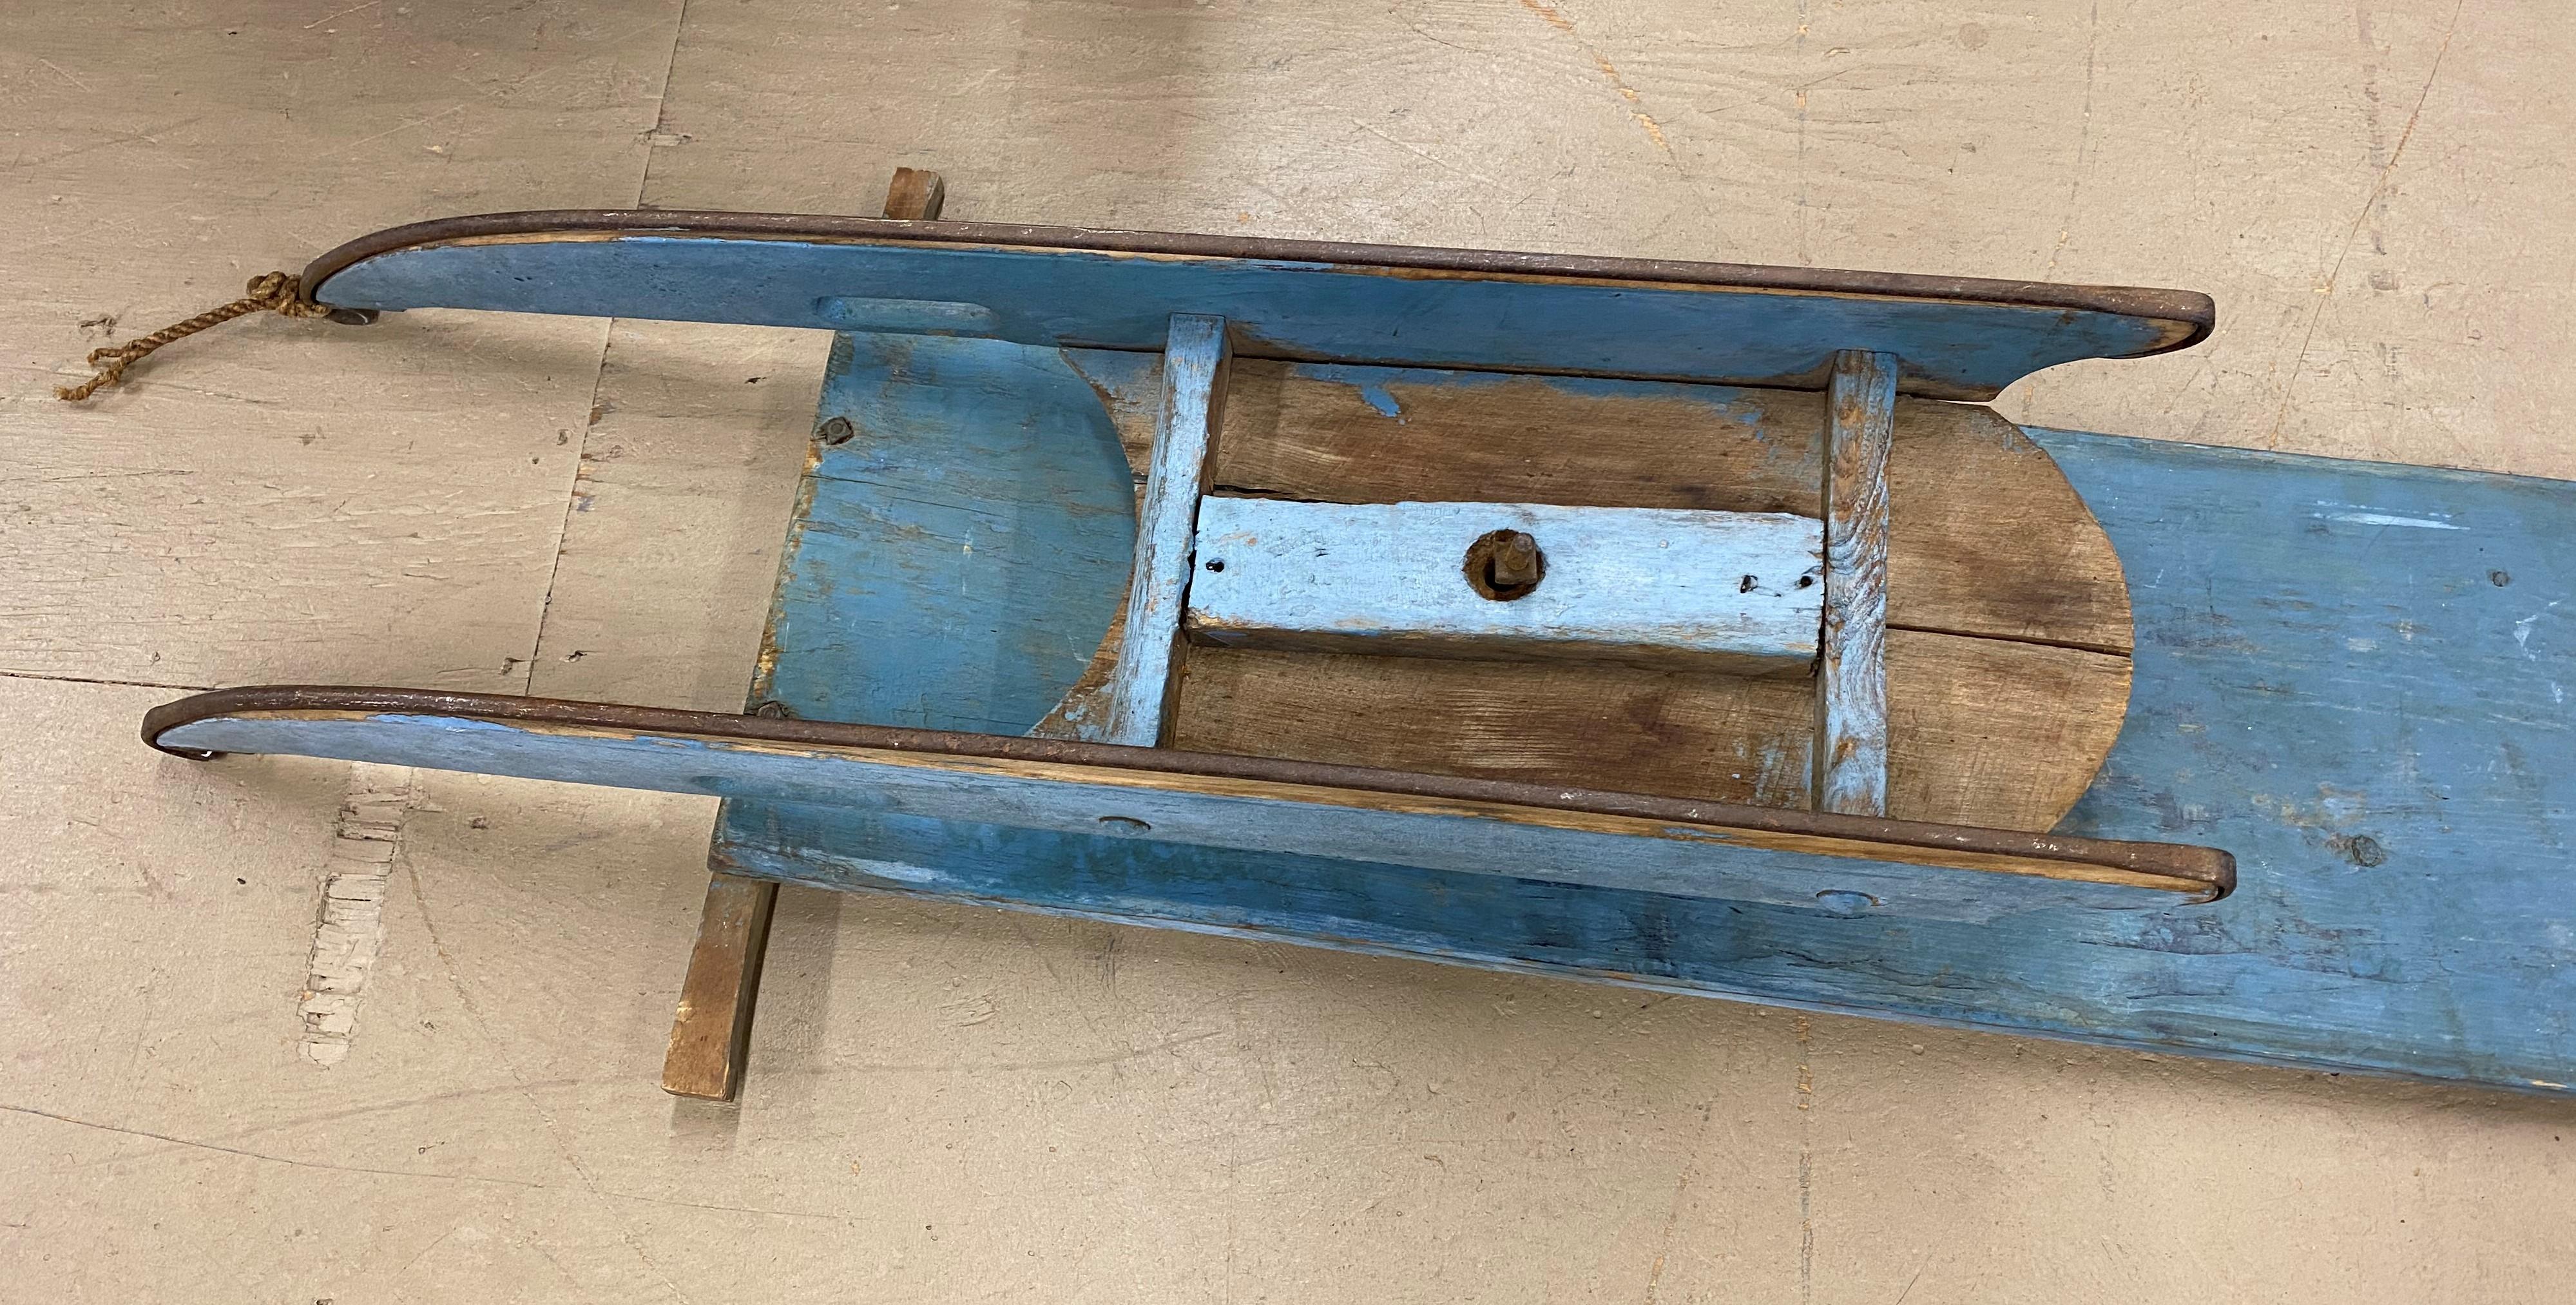 Iron Early 20th C Eight Foot Wooden Traverse Sled in Old Blue Paint